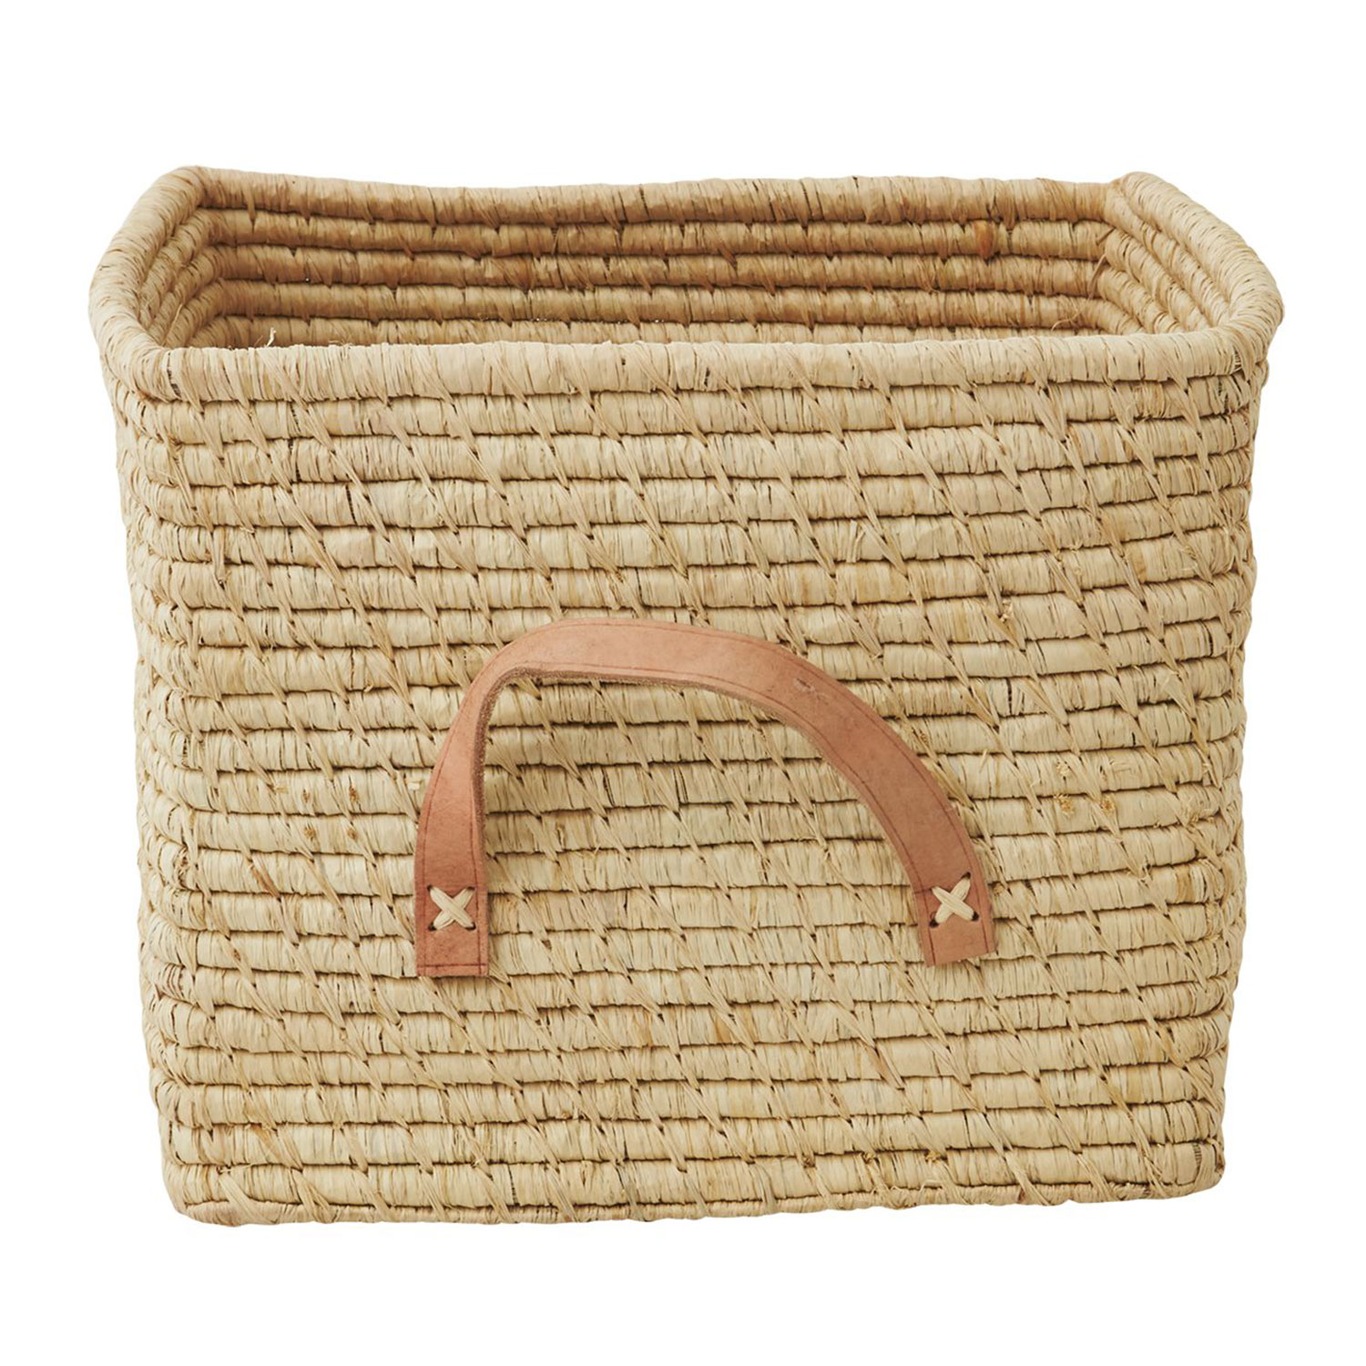 Basket with Leather Handles, Natural